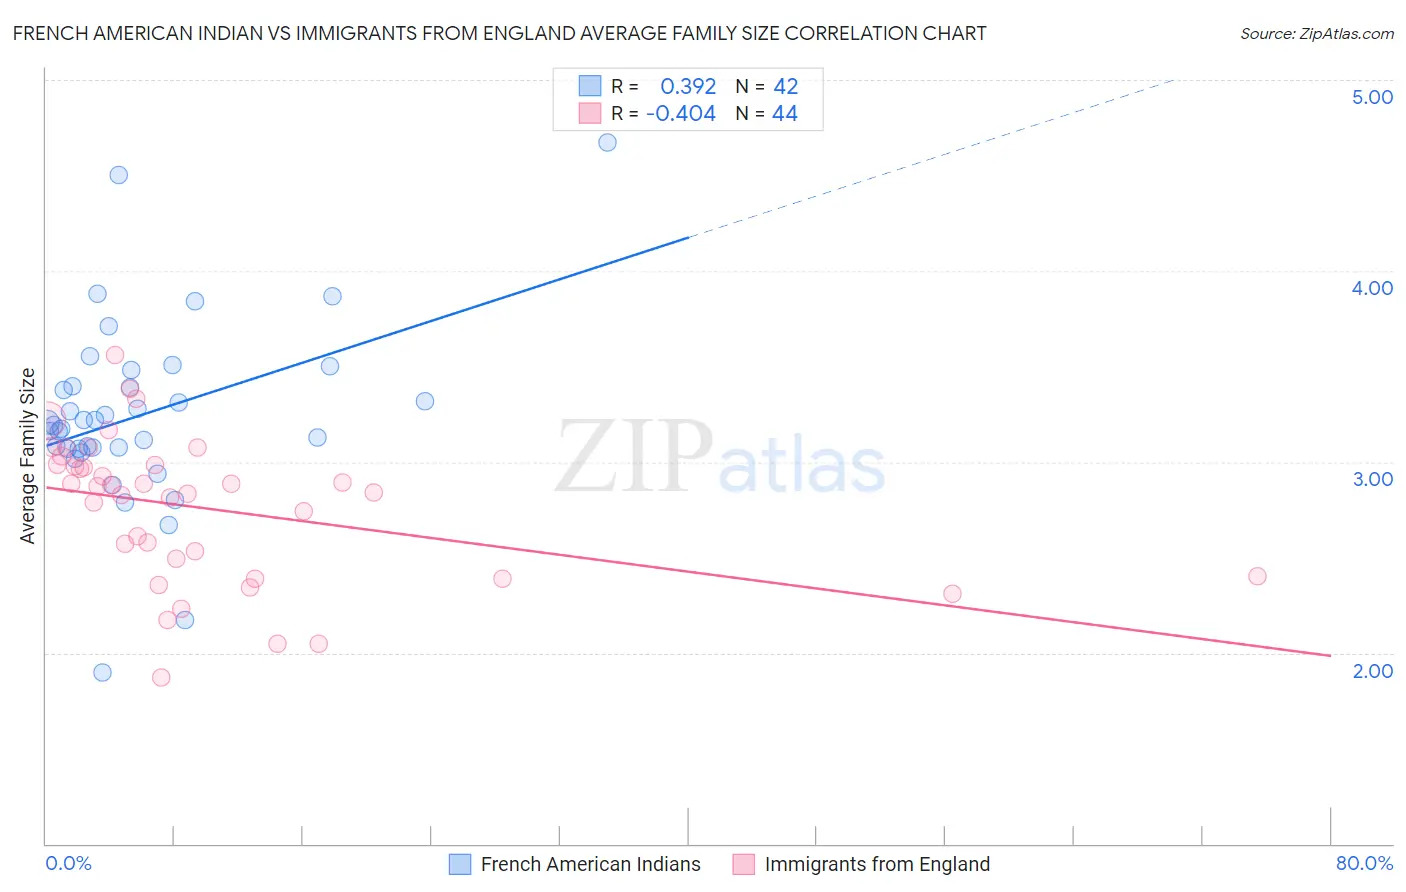 French American Indian vs Immigrants from England Average Family Size